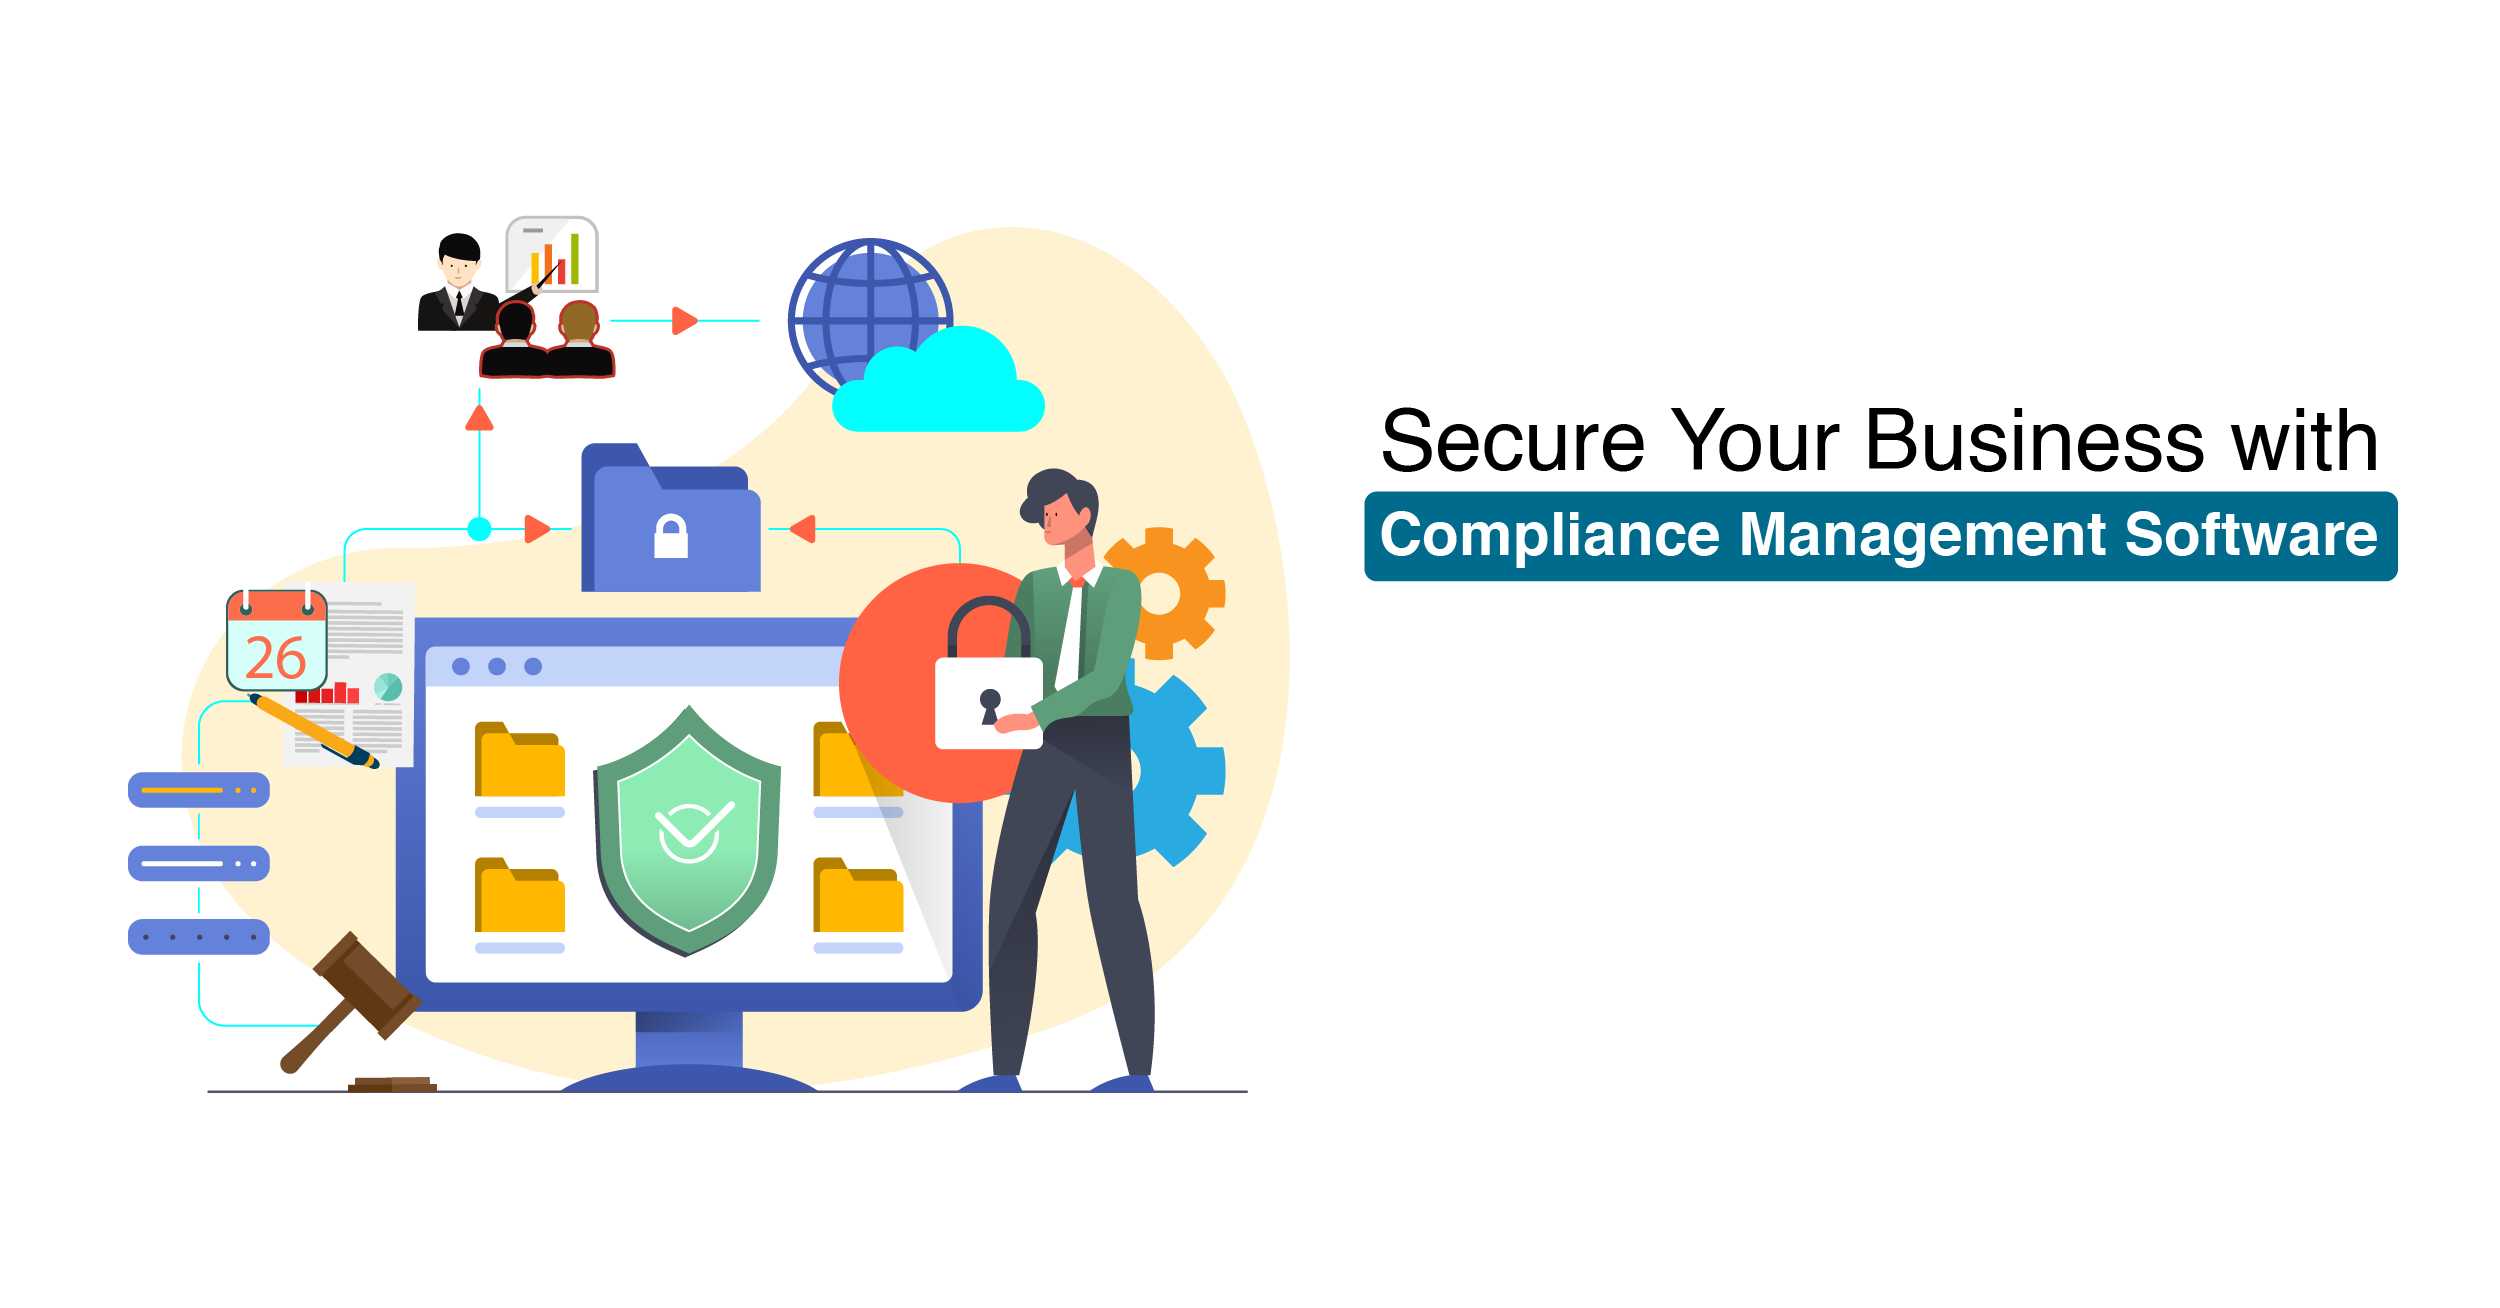 Secure Your Business with Compliance Management Software